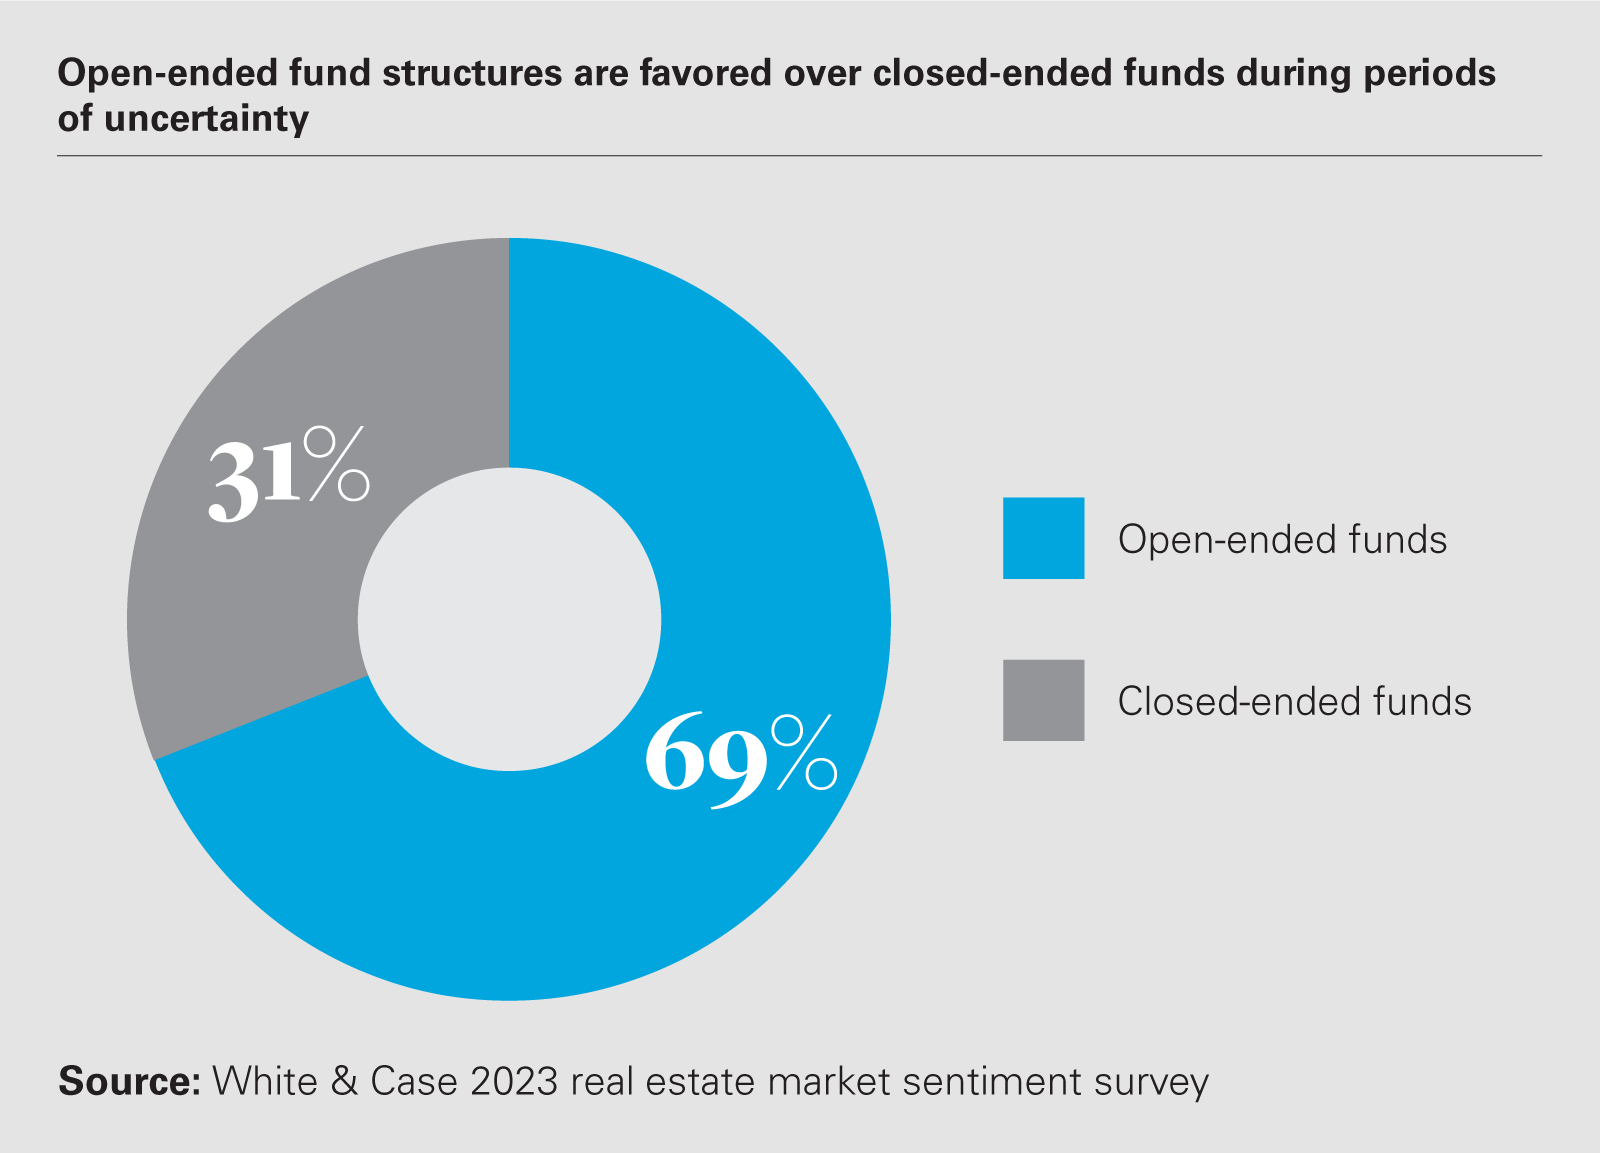 Open-ended fund structures are favored over closed-ended funds during periods of uncertainty